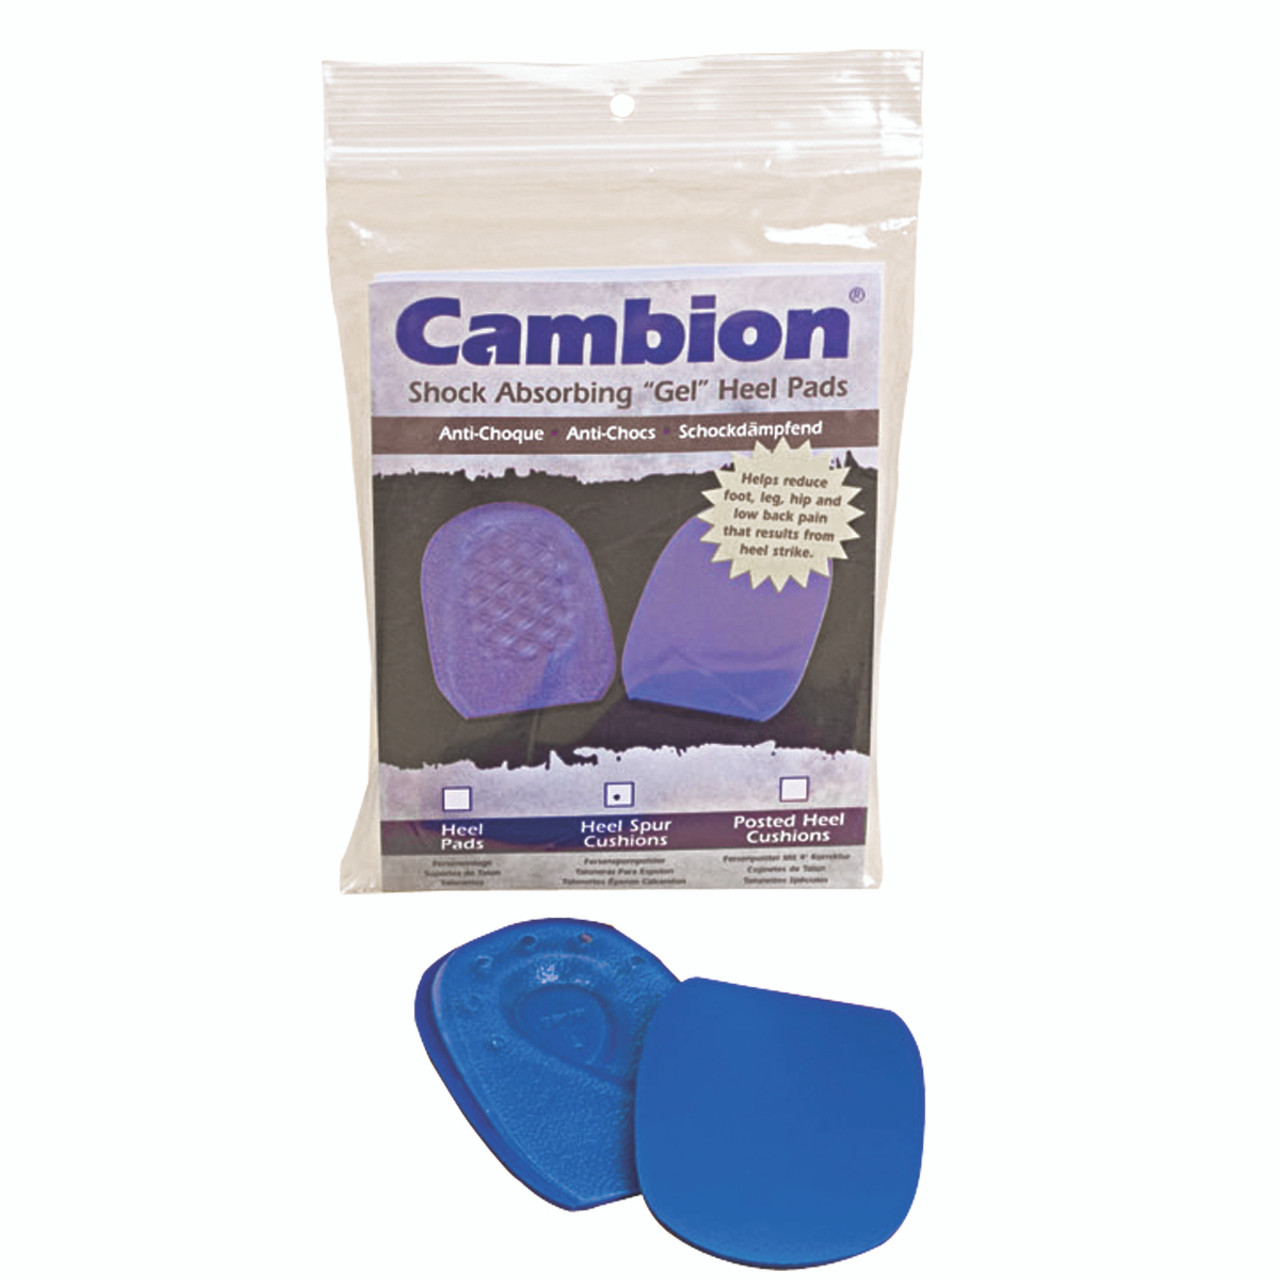 Heel Spur Cushions, size A